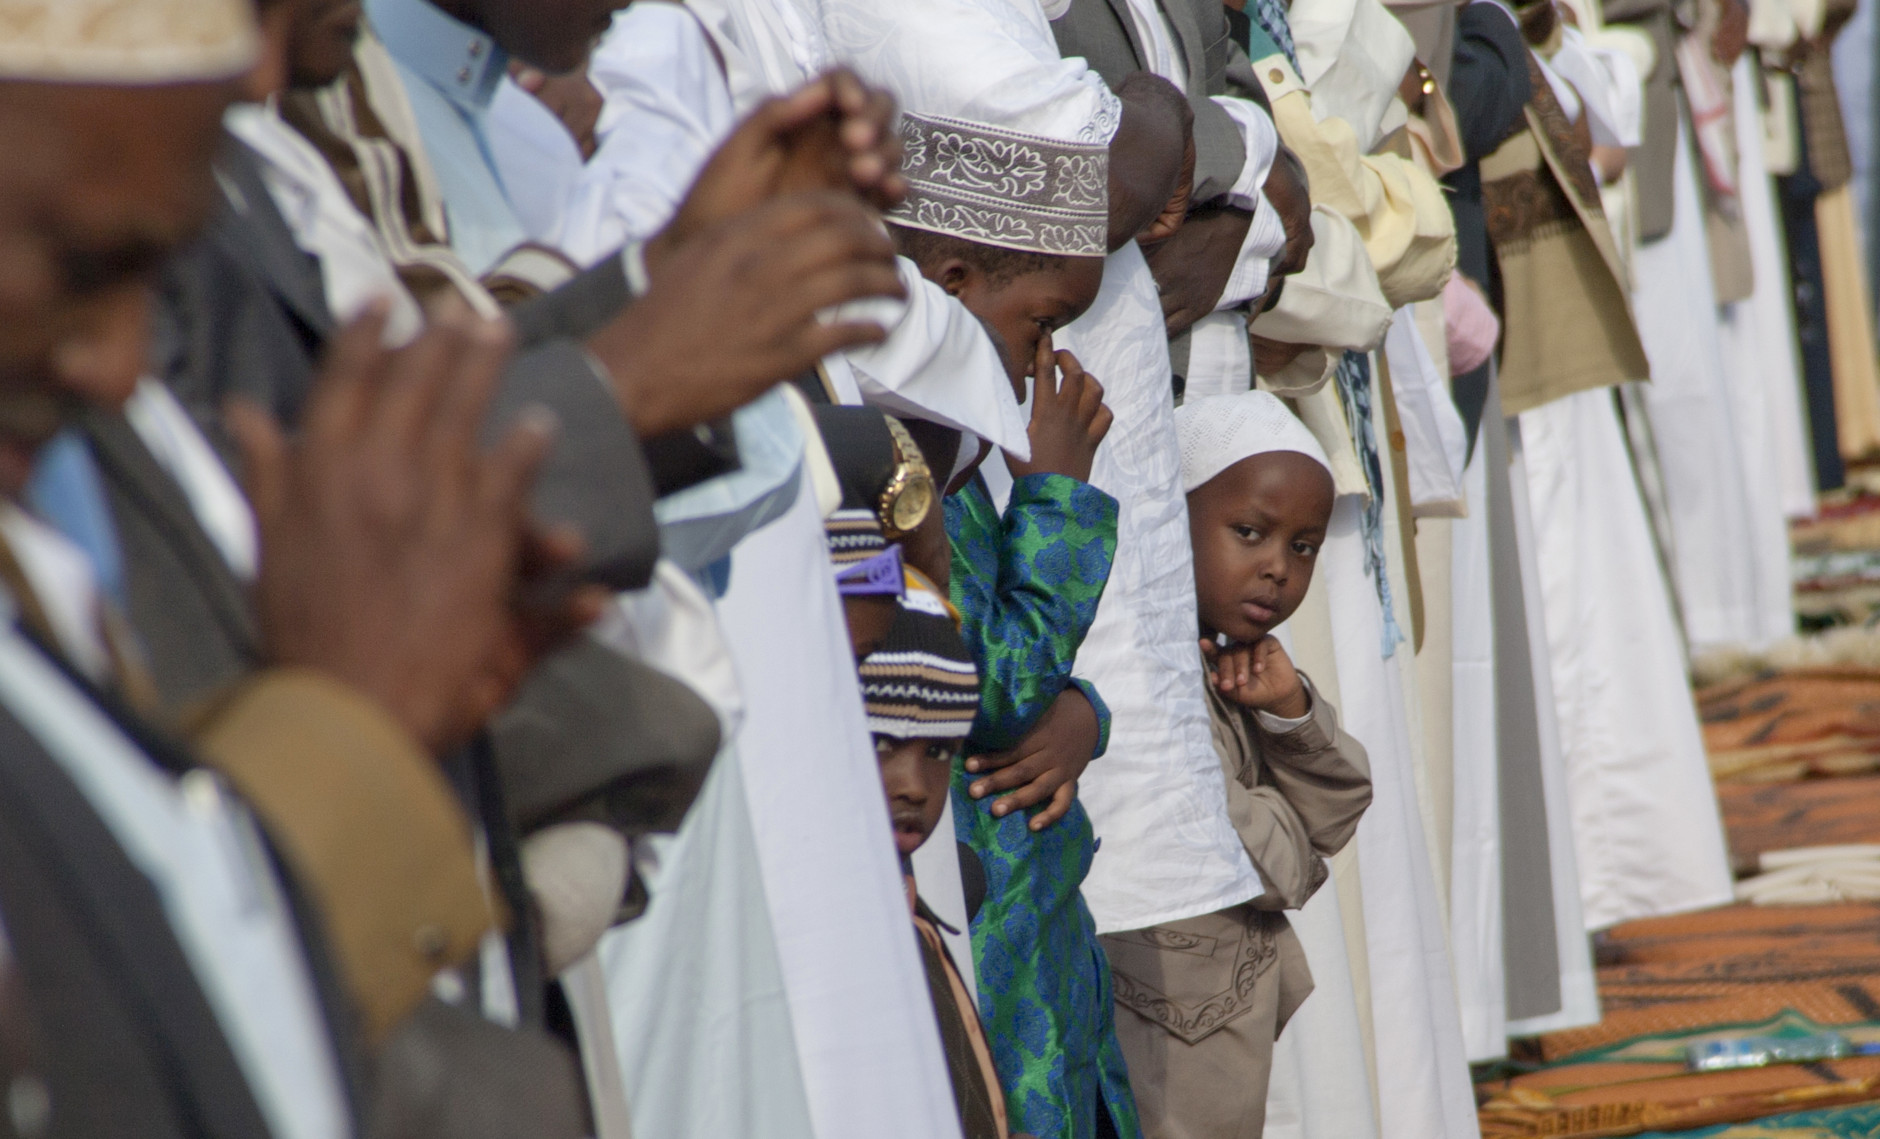 Kenyan Muslim boys join in prayers during the Eid al-Fitr on the open ground as Muslims around the world celebrate the end of the holy month of Ramadan in Nairobi, Kenya, Wednesday, July 6, 2016. (AP Photo/ Sayyid Abdul Azim)